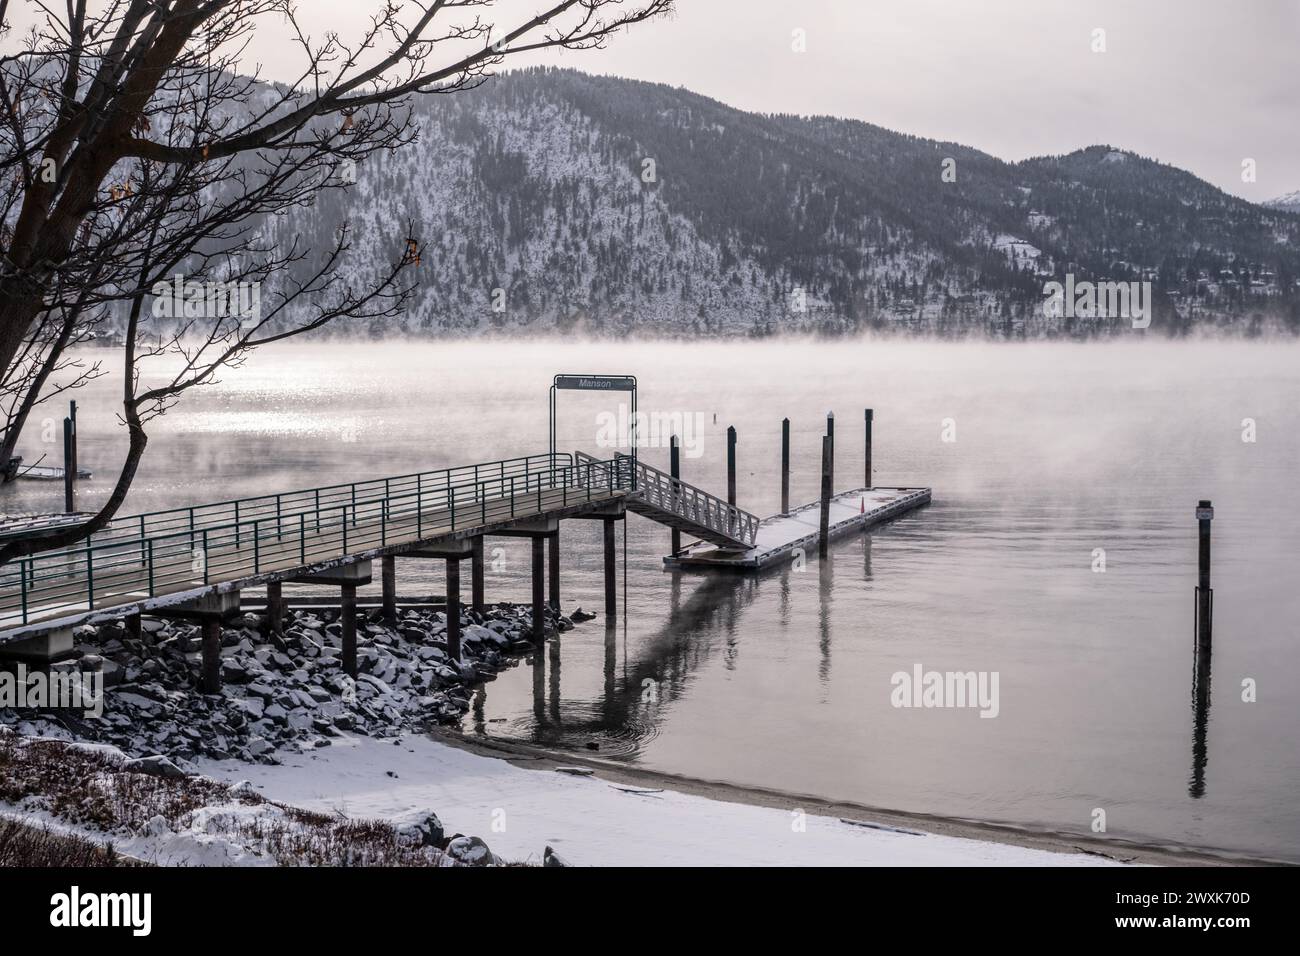 Mist rises from Lake Chelan around the Manson Pier and Jetty during a winter cold snap Stock Photo